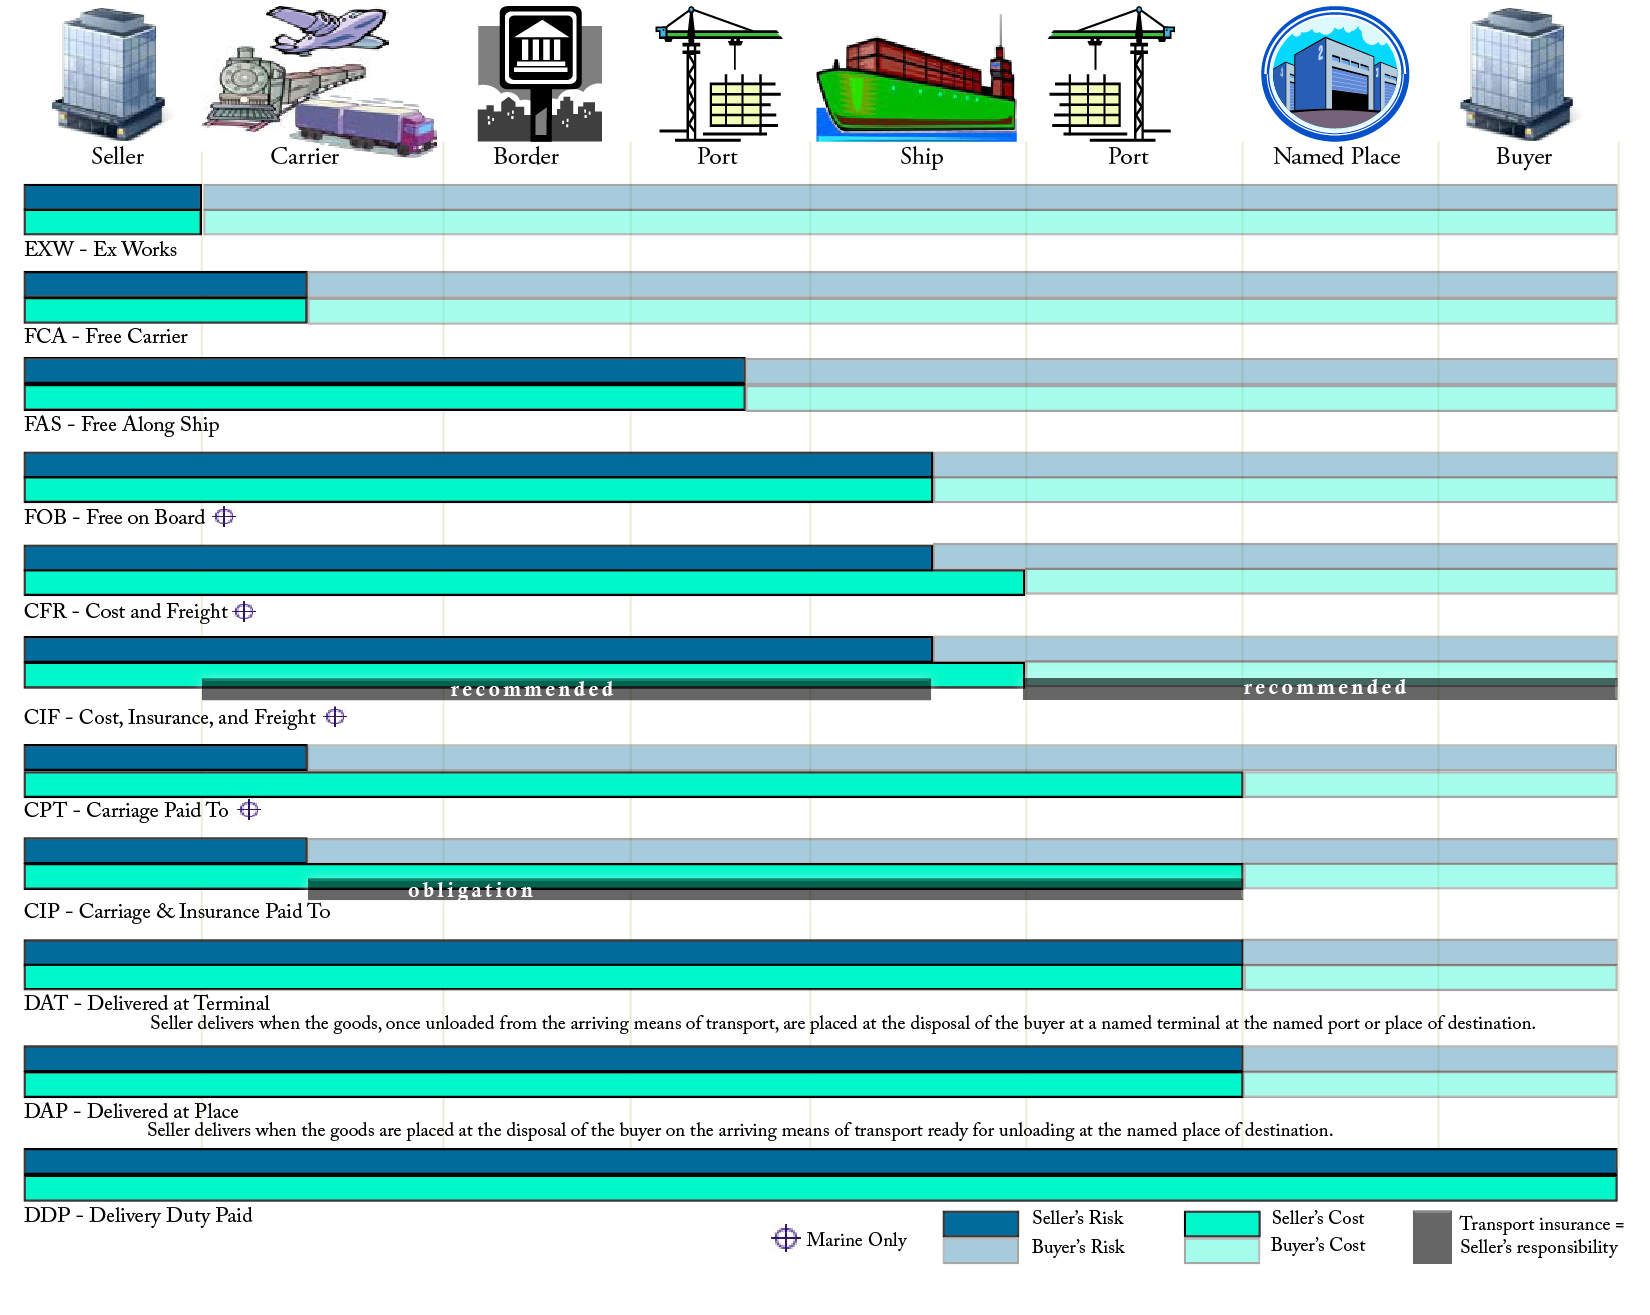 incoterms 2010